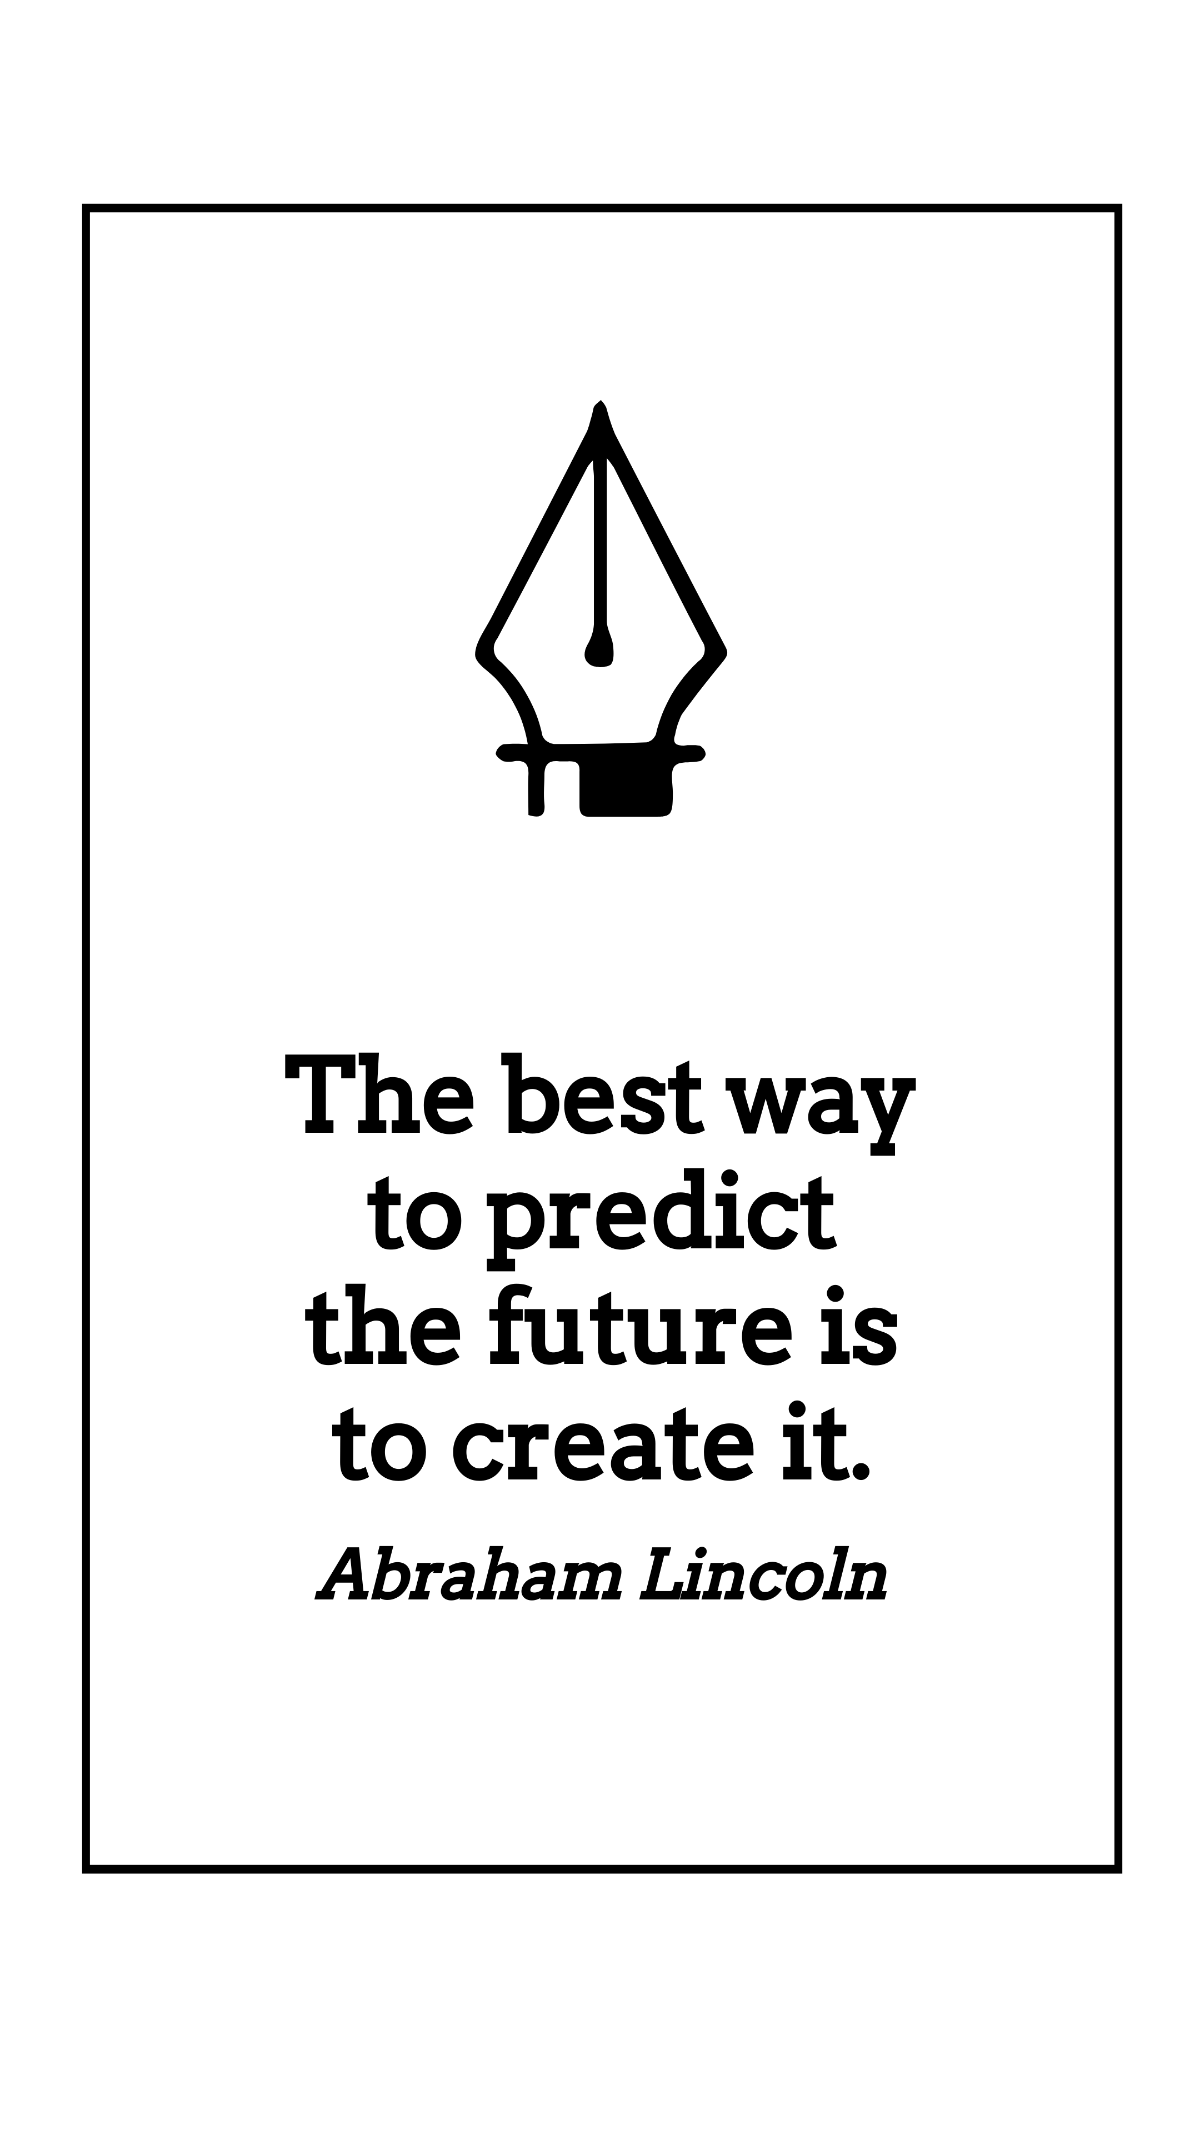 Free Abraham Lincoln - The best way to predict the future is to create it. Template